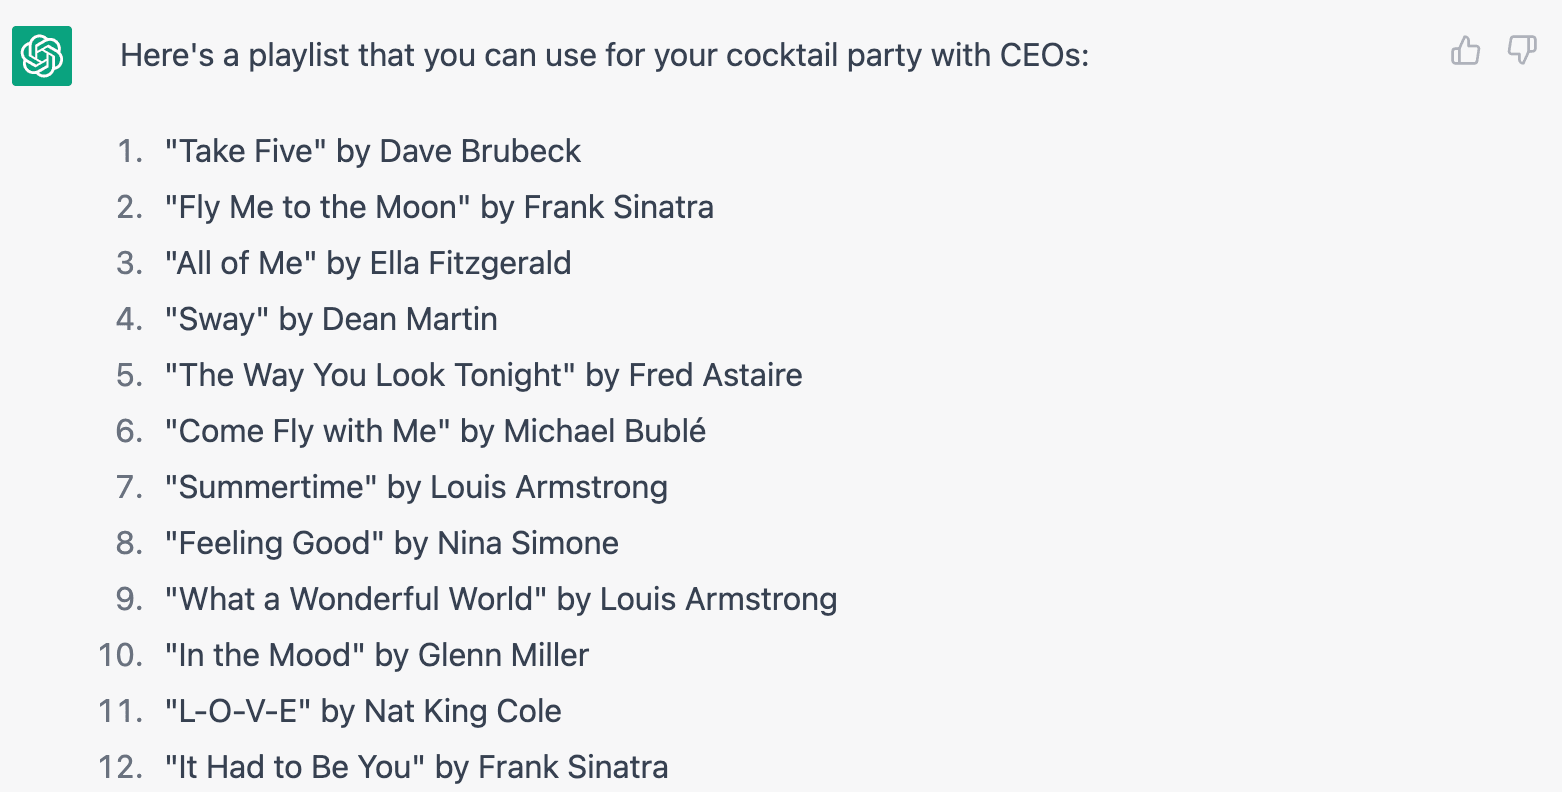 ChatGPT response for a playlist for a cocktail party with CEOs